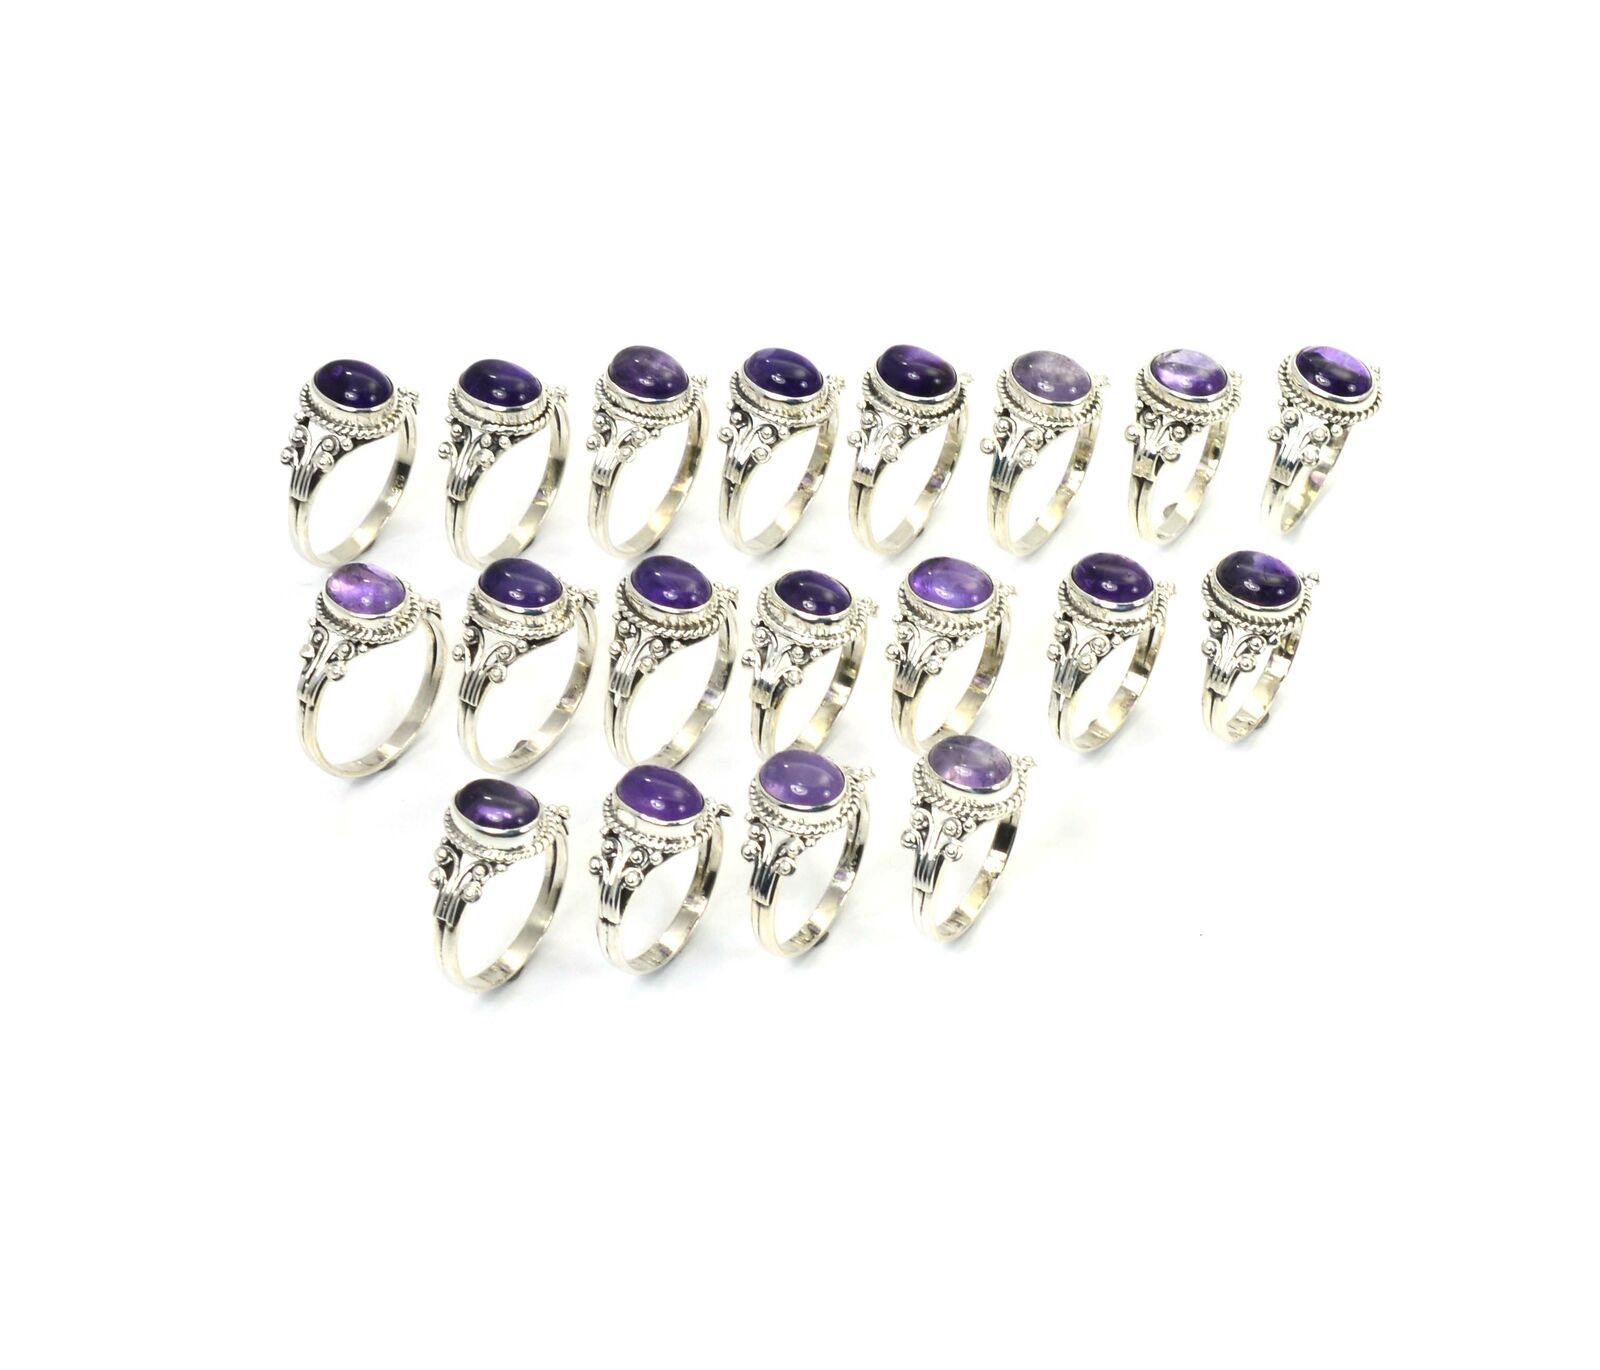 Wholesale 19pc 925 Solid Sterling Silver Purple Amethyst Ring Lot W316